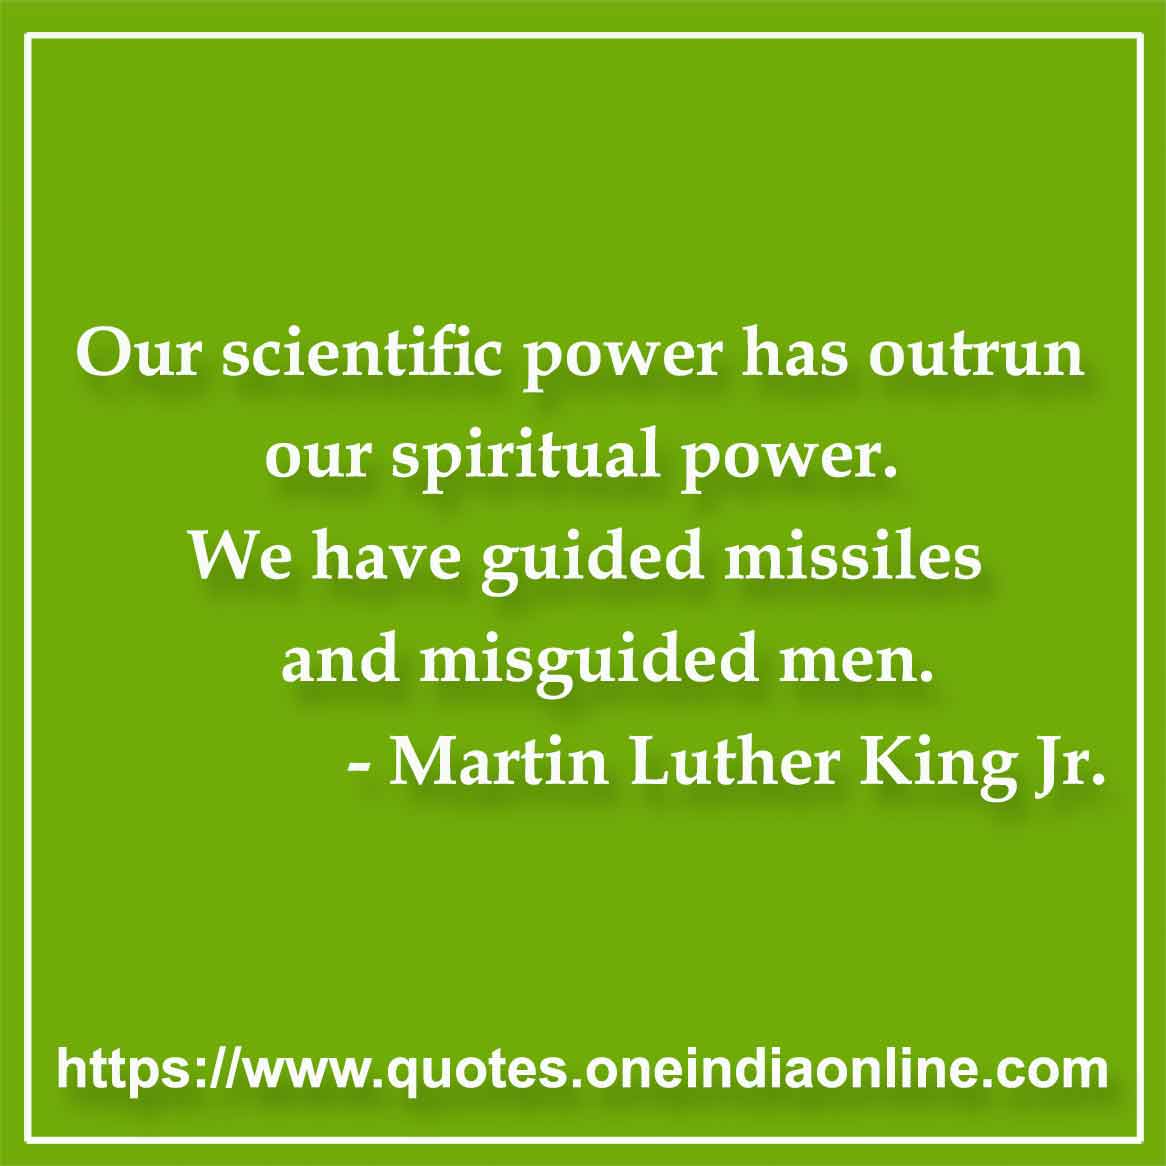 Our scientific power has outrun our spiritual power. We have guided missiles and misguided men.

- Martin Luther King Jr. Quotes